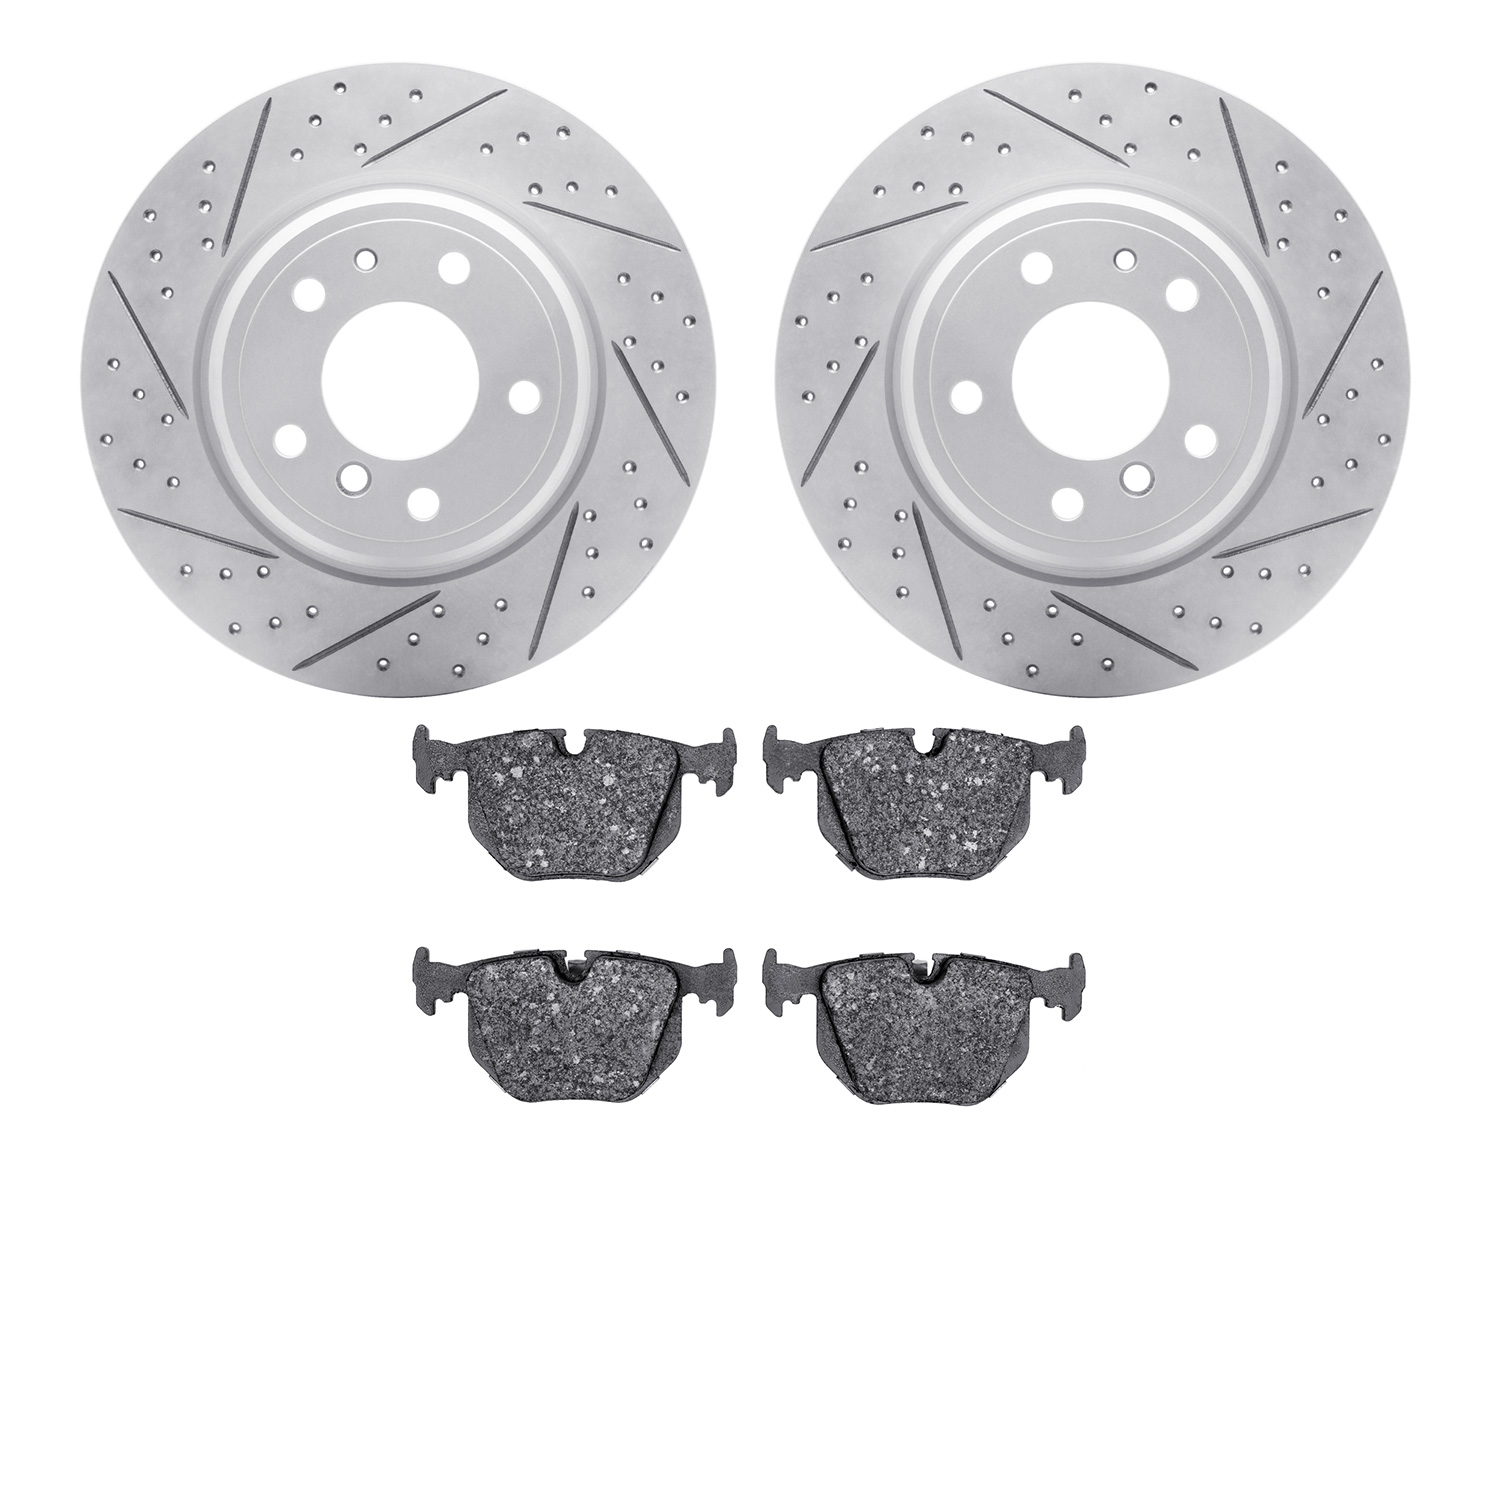 2502-31012 Geoperformance Drilled/Slotted Rotors w/5000 Advanced Brake Pads Kit, 1991-2001 BMW, Position: Rear